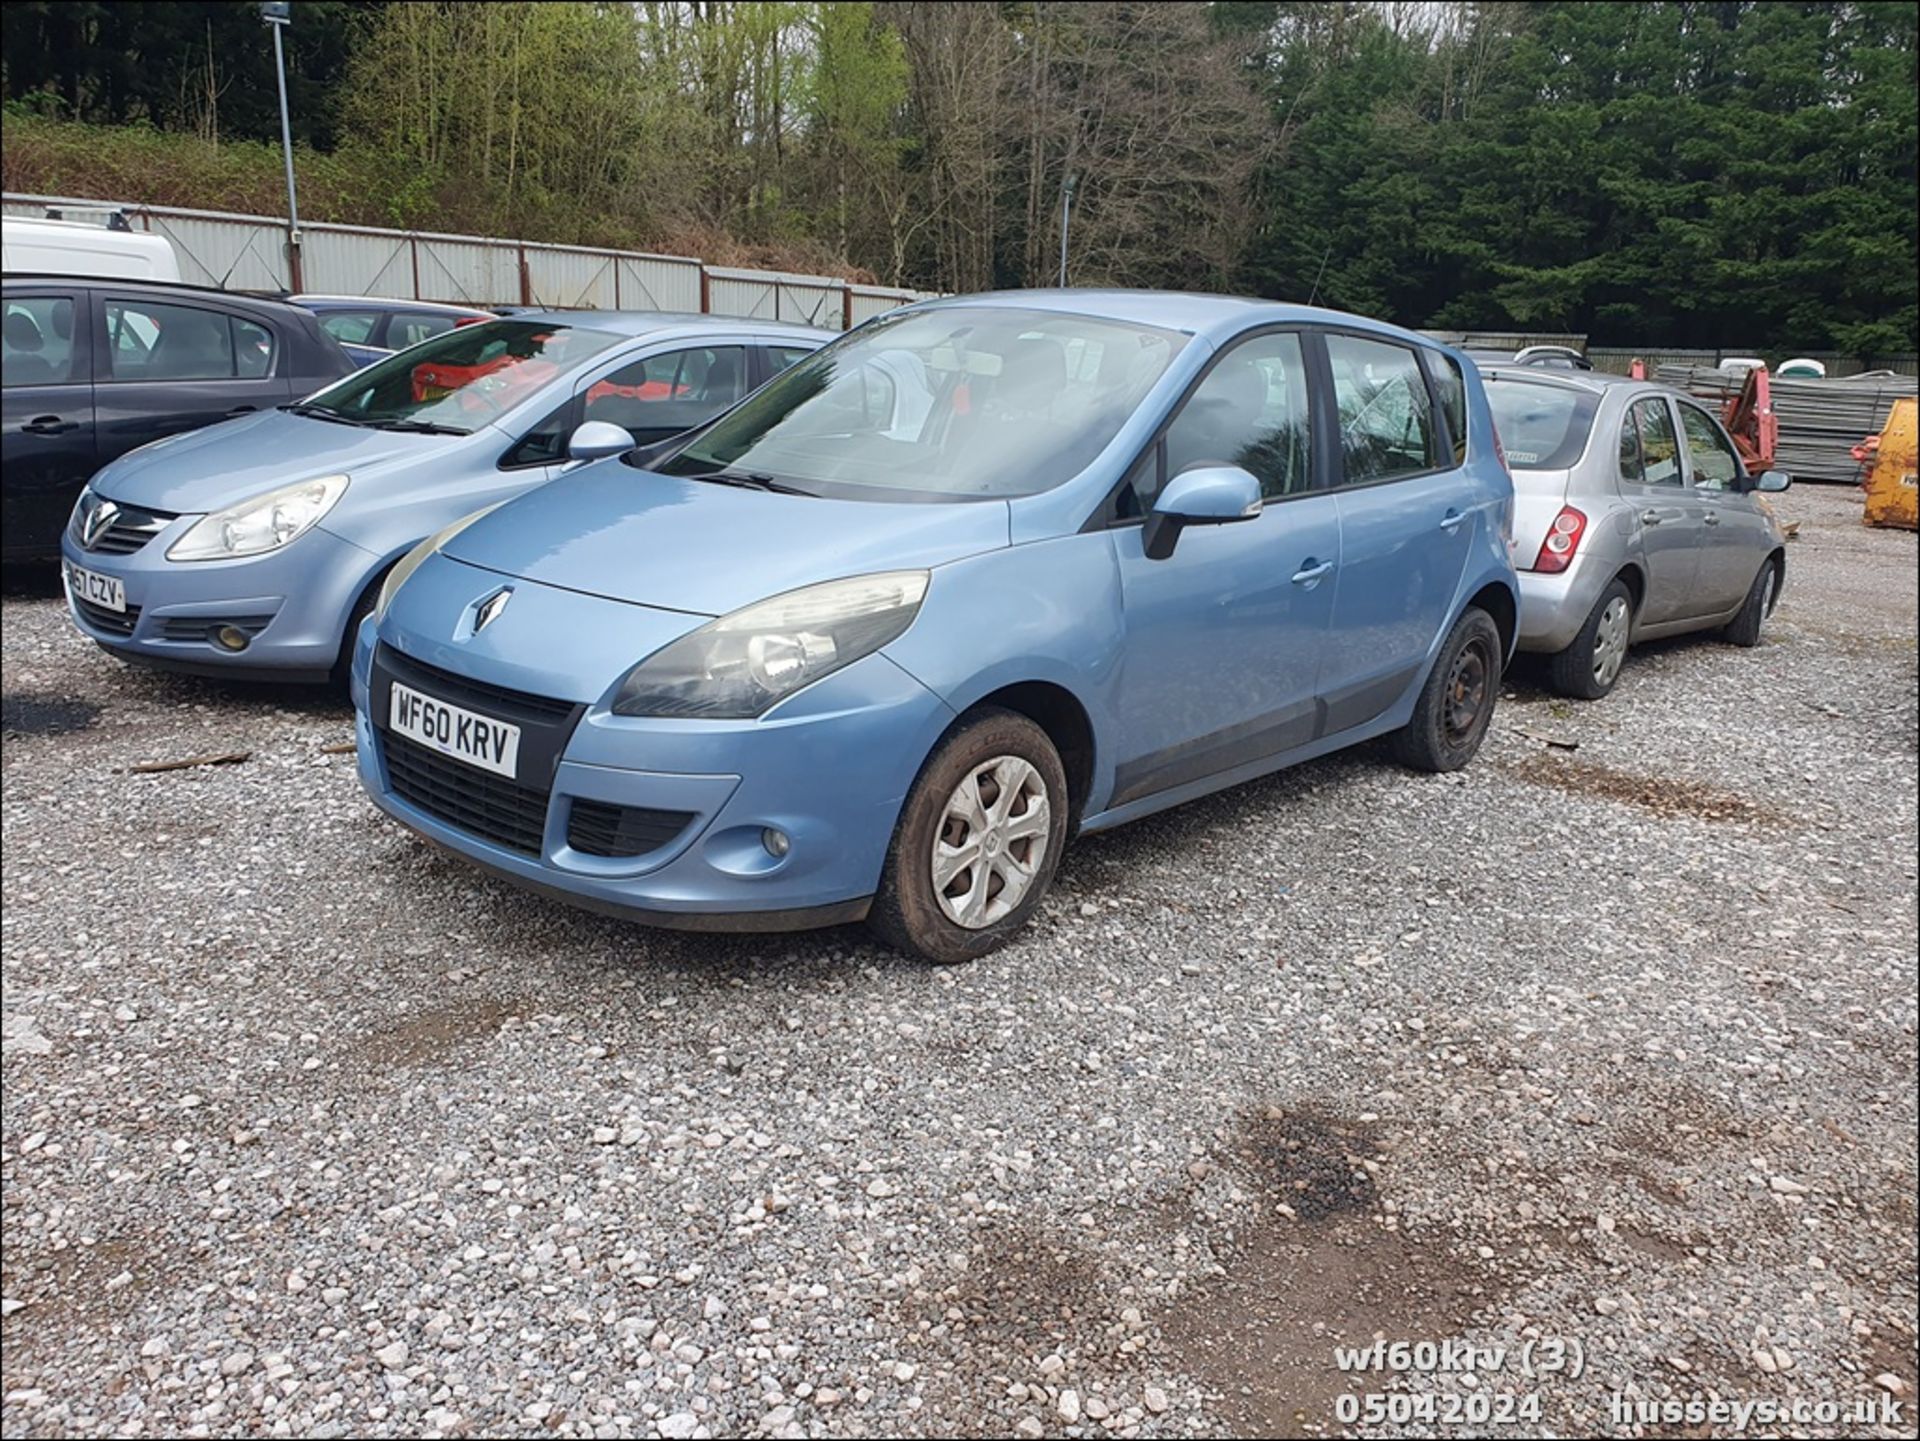 10/60 RENAULT SCENIC EXPRESSION DCI 105 - 1461cc 5dr MPV (Blue) - Image 4 of 50